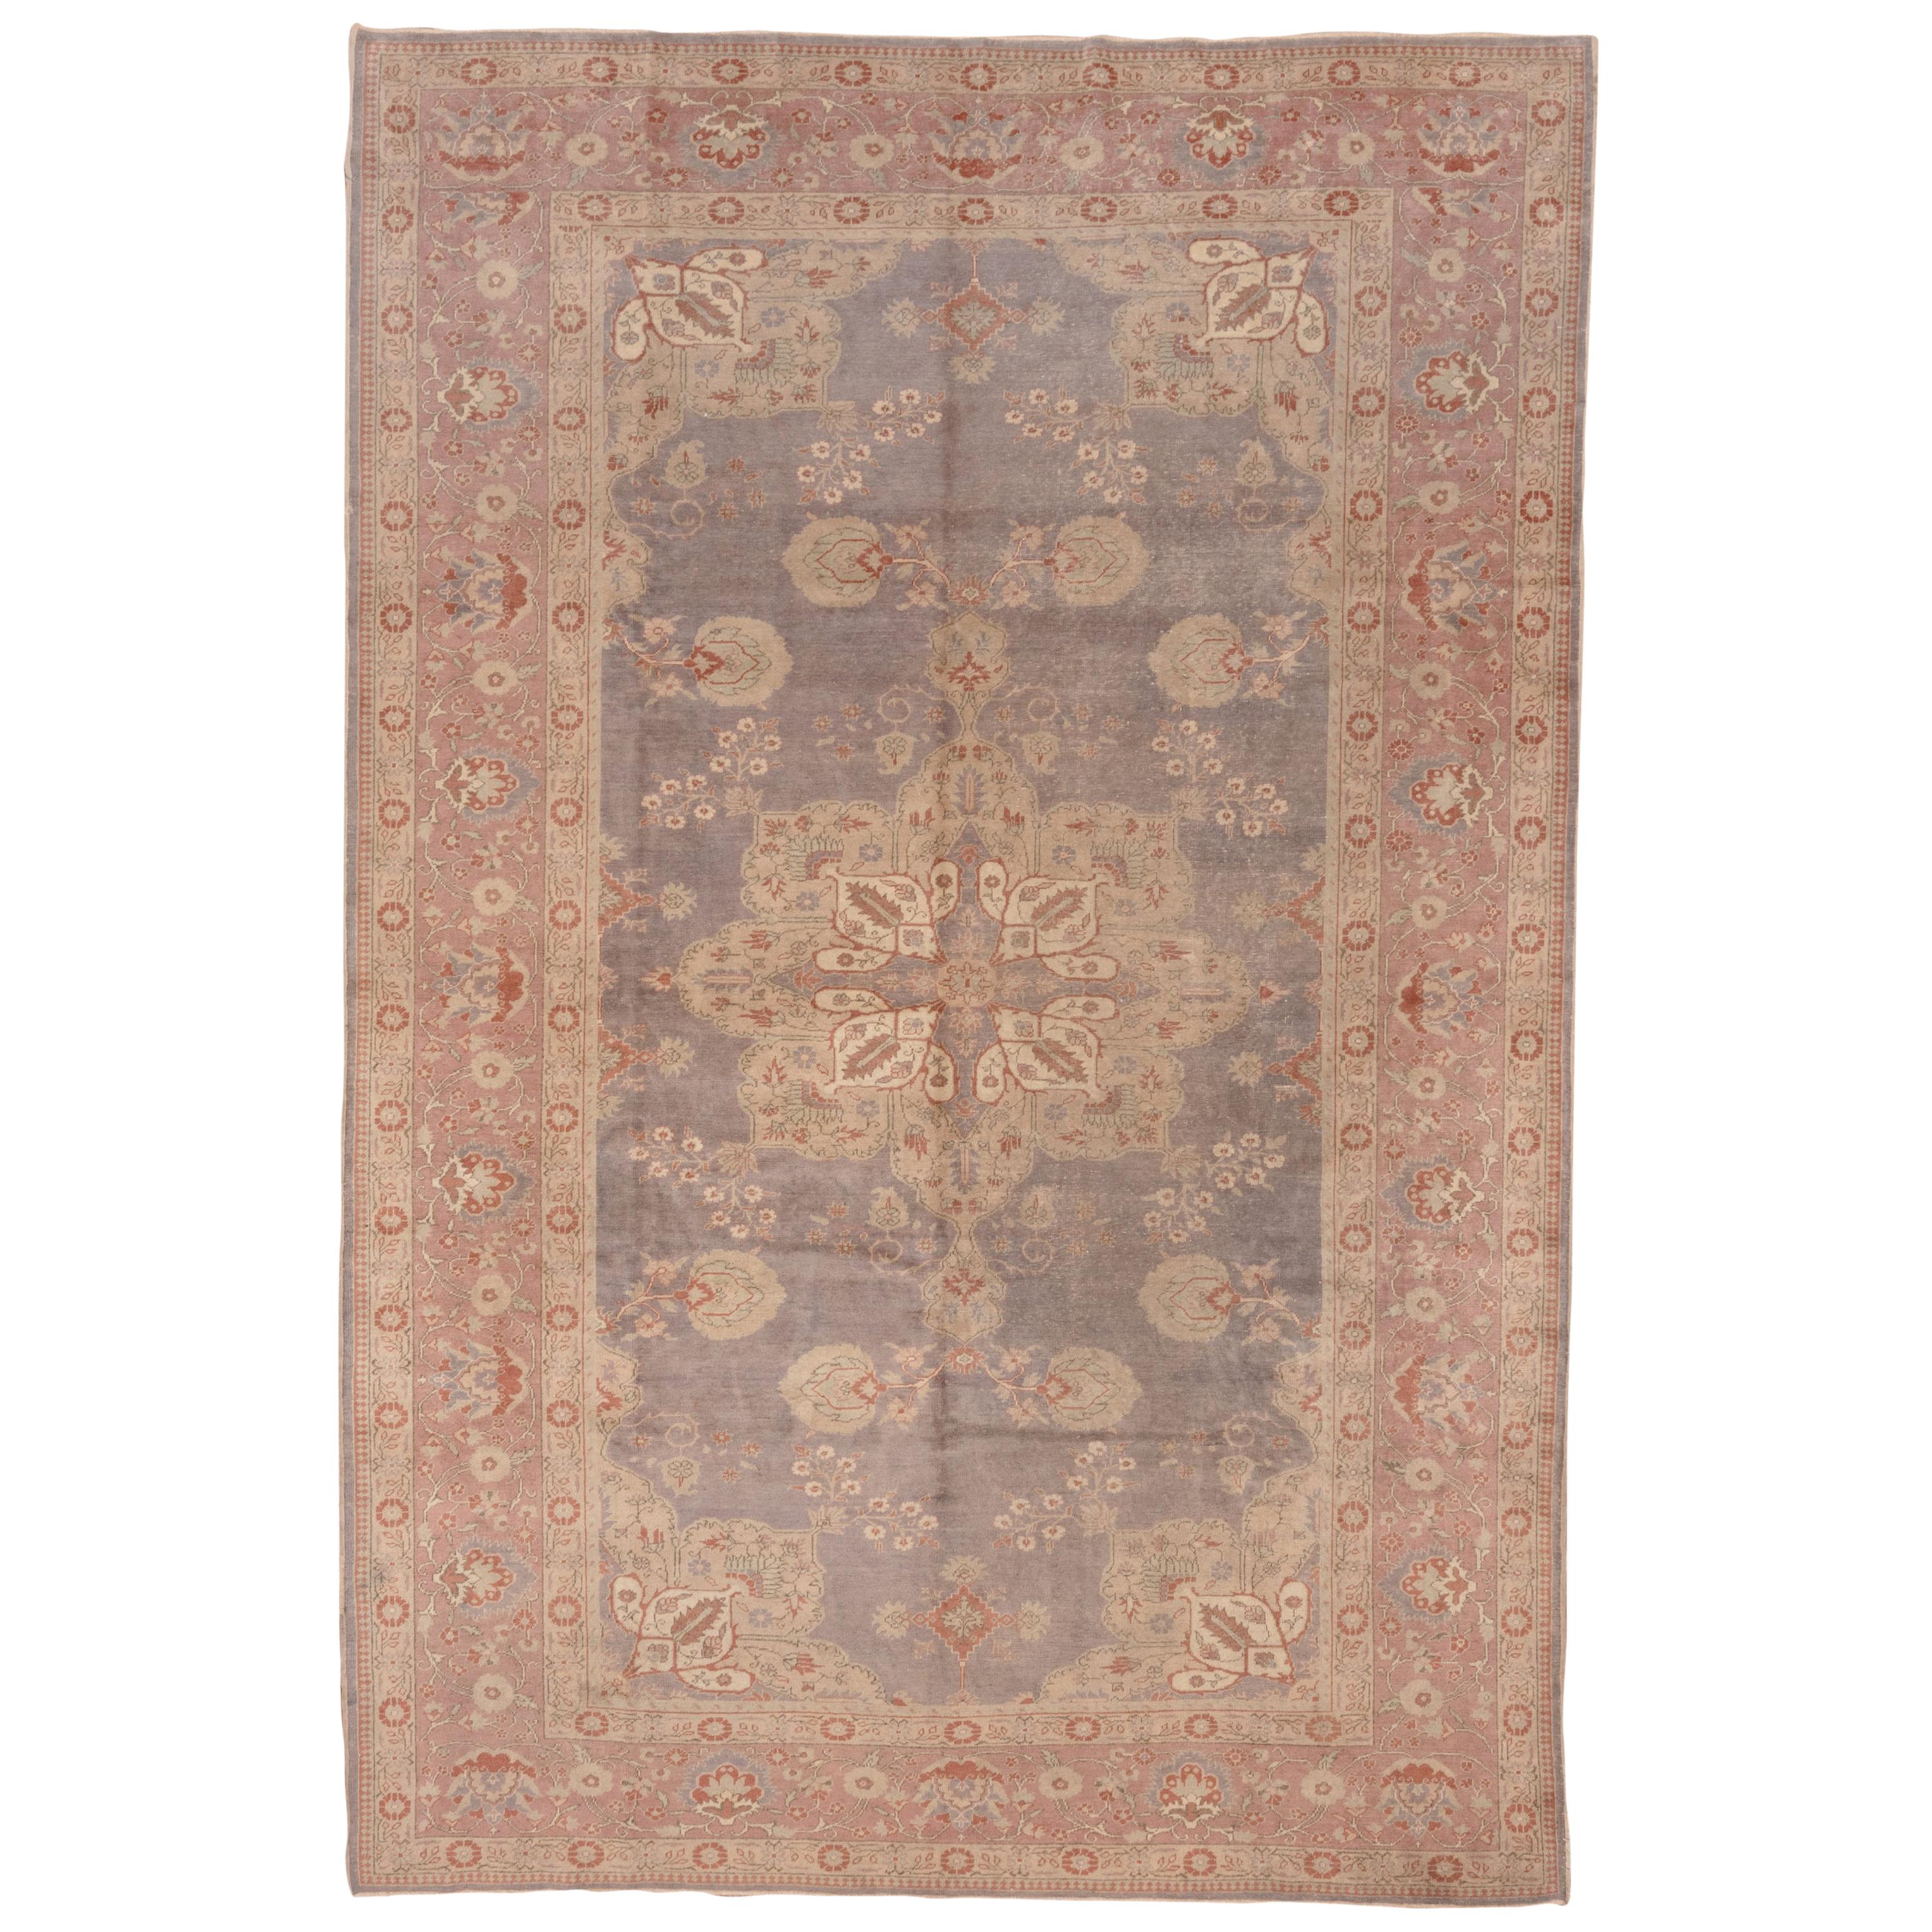 Antique Turkish Oushak Carpet, Gray Field, Pink Borders For Sale